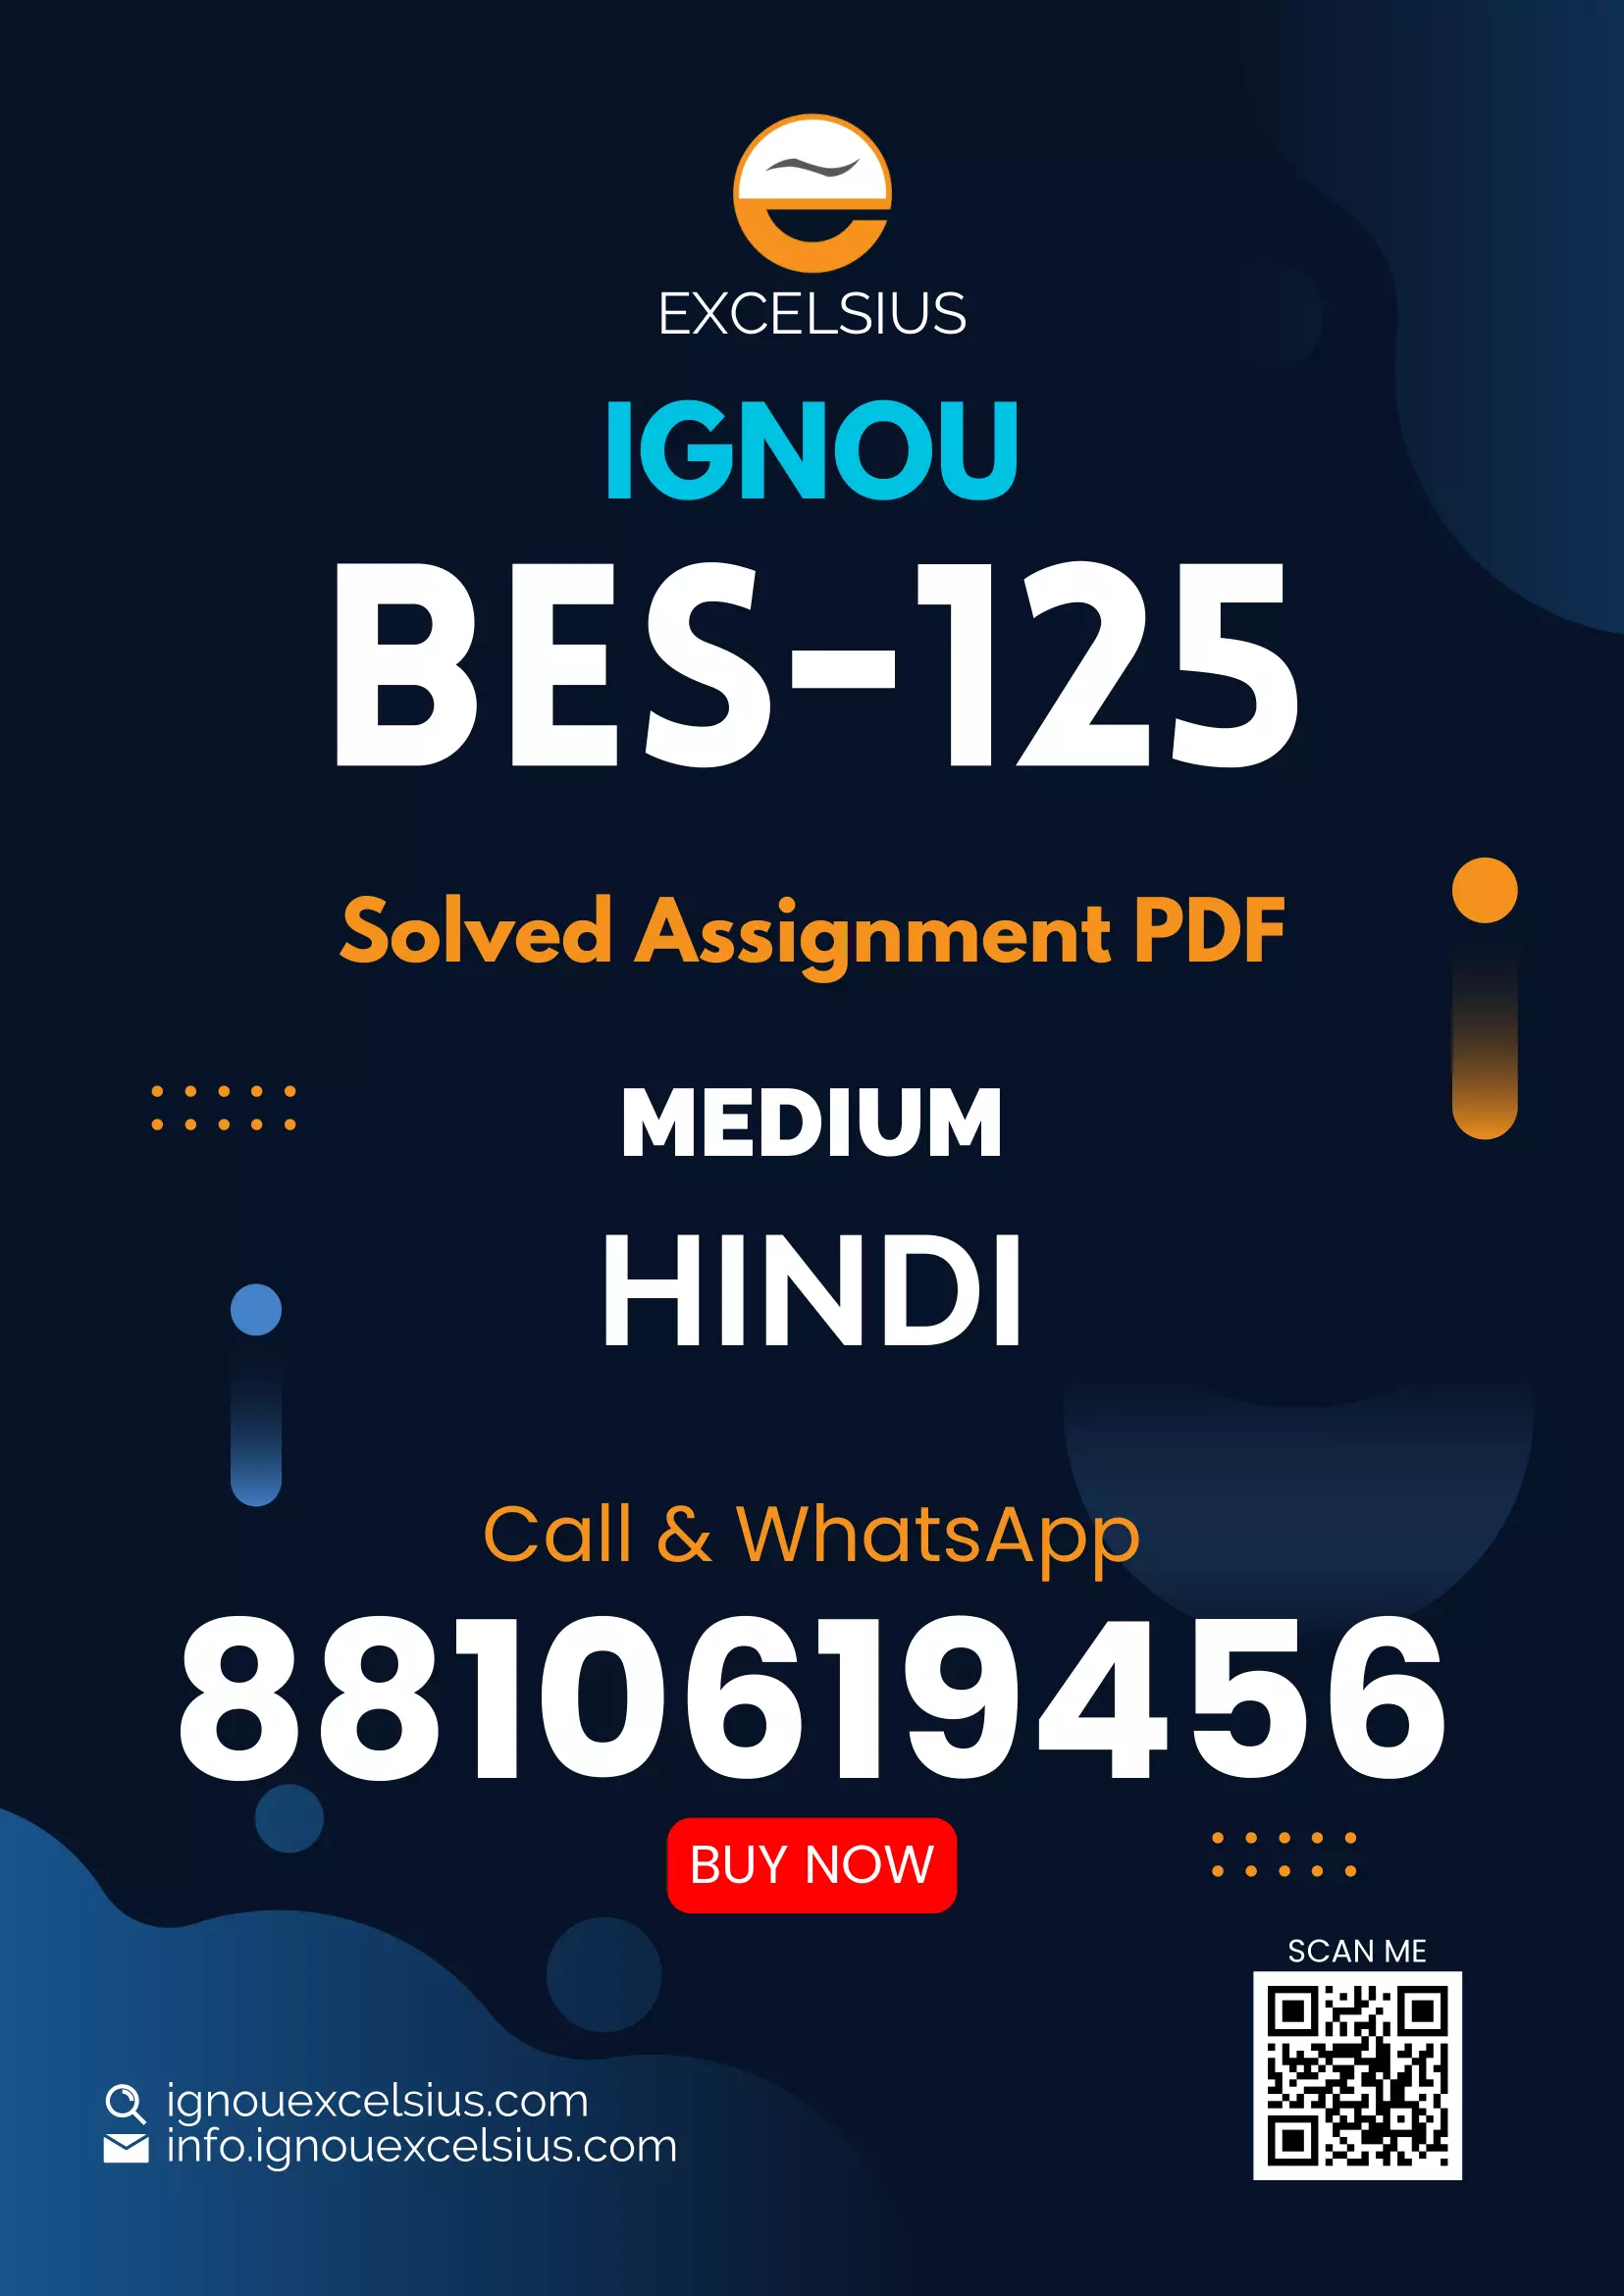 IGNOU BES-125 - Understanding Disciplines and Subjects, Latest Solved Assignment-January 2022